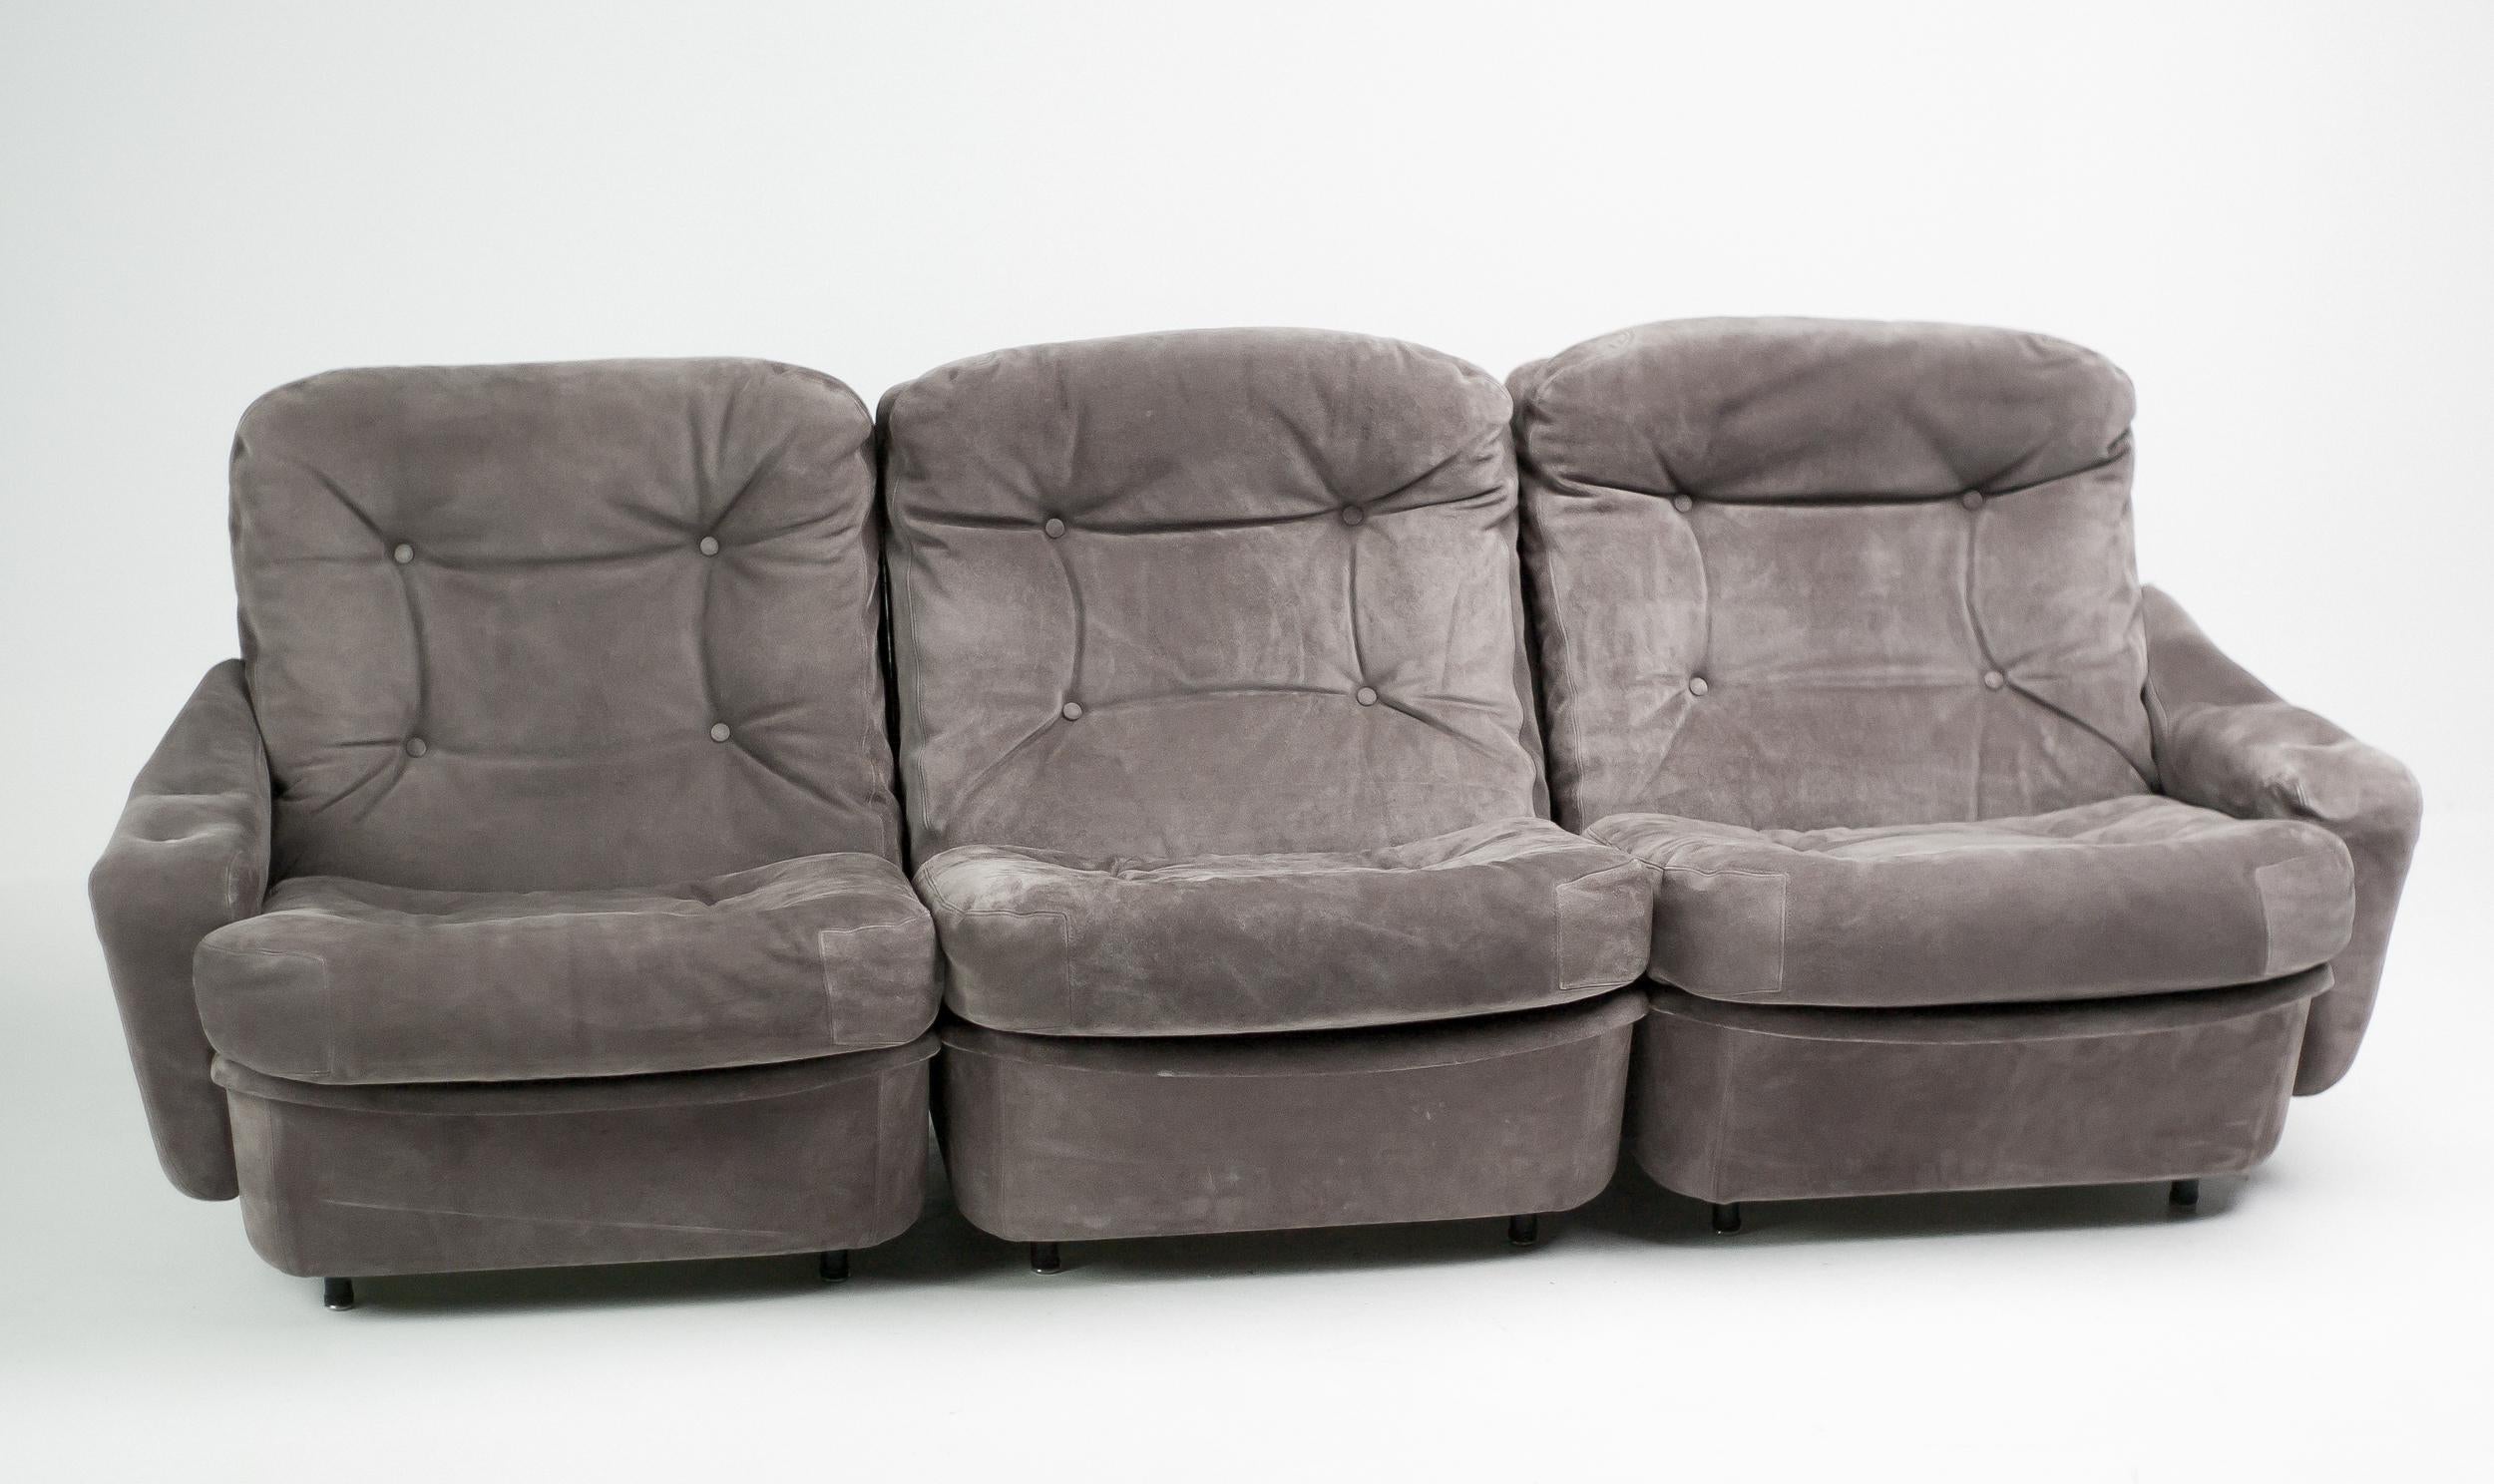 Large Michel Cadestin ‘Orchidée’ Sectional Sofa by Airborne For Sale 2